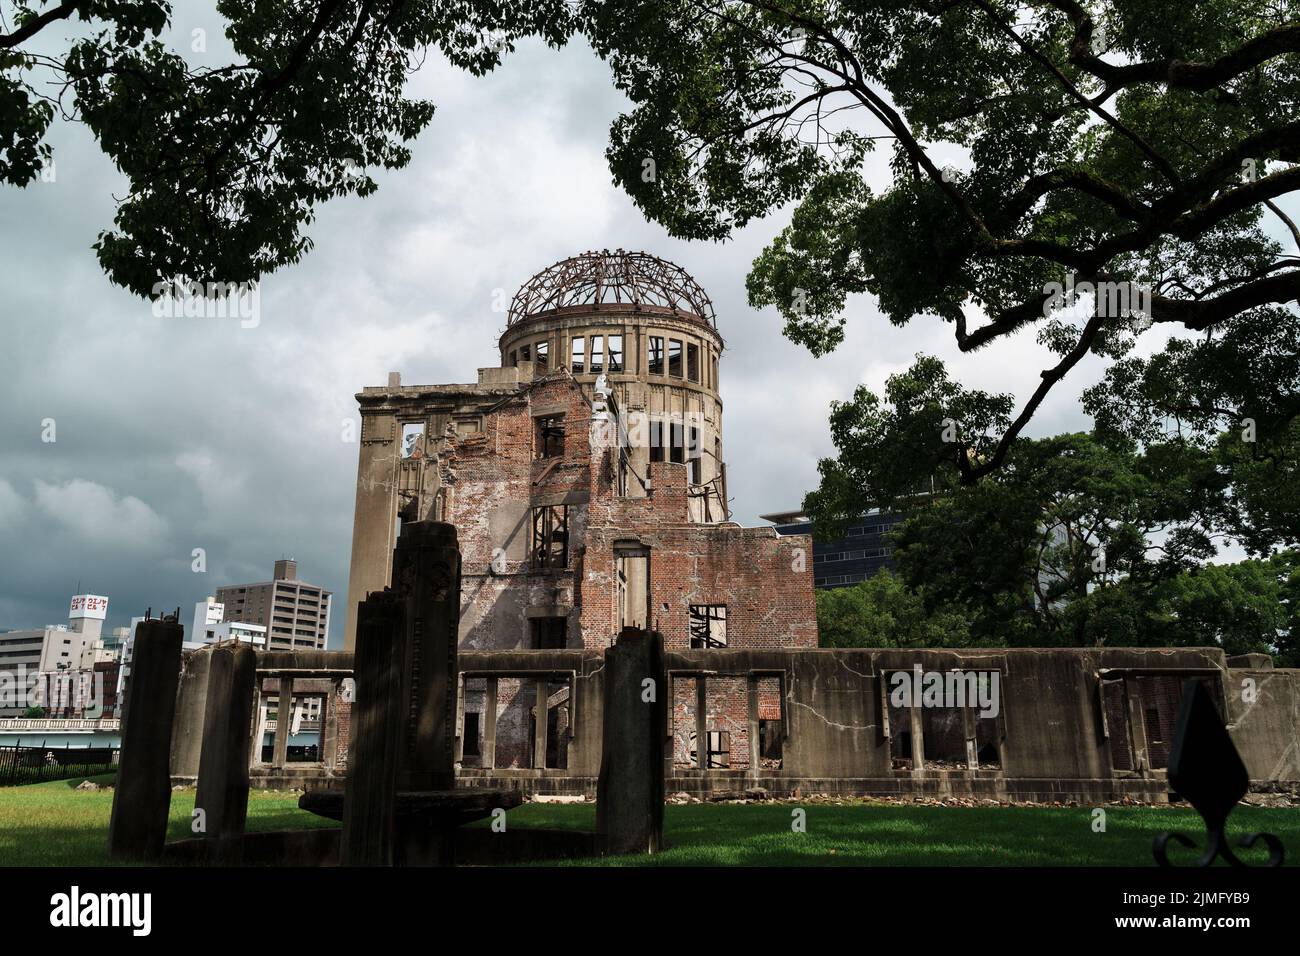 (220806) -- HIROSHIMA, Aug. 6, 2022 (Xinhua) -- Photo taken on Aug. 5, 2022 shows the site of the atomic bombing near the Peace Memorial Park in Hiroshima, Japan. Japan marked the 77th anniversary of the atomic bombing of its western city of Hiroshima on Saturday. While Japan inwardly looks at the tragedies it had experienced at the end of World War II, historians and political minds of the international community have encouraged Japan to come to see themselves not as merely victims of the atomic bombings but also as the perpetrators who led to these tragic incidents to happen in the first Stock Photo